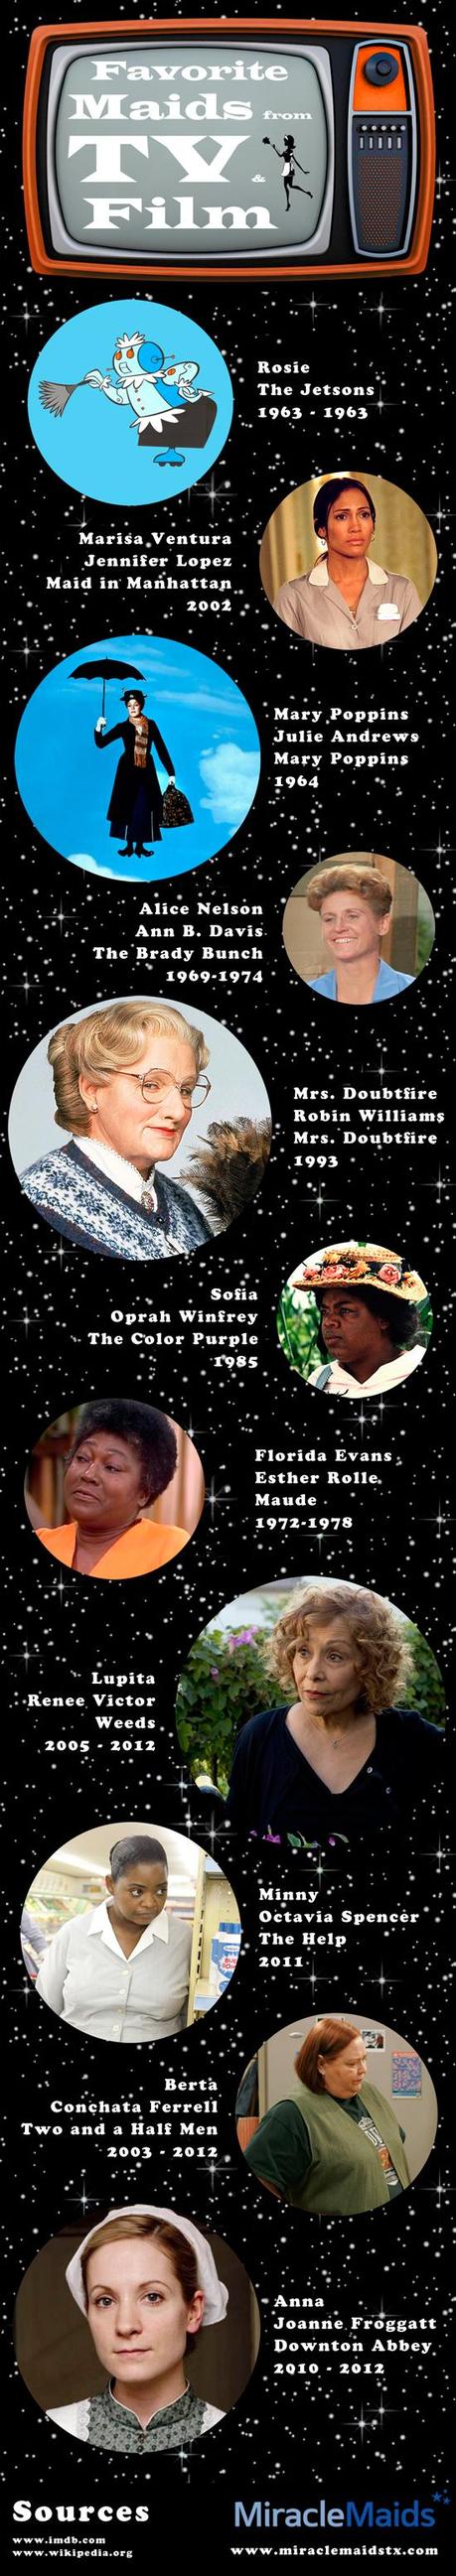 Most Famous Maids on TV and Movies Infographic